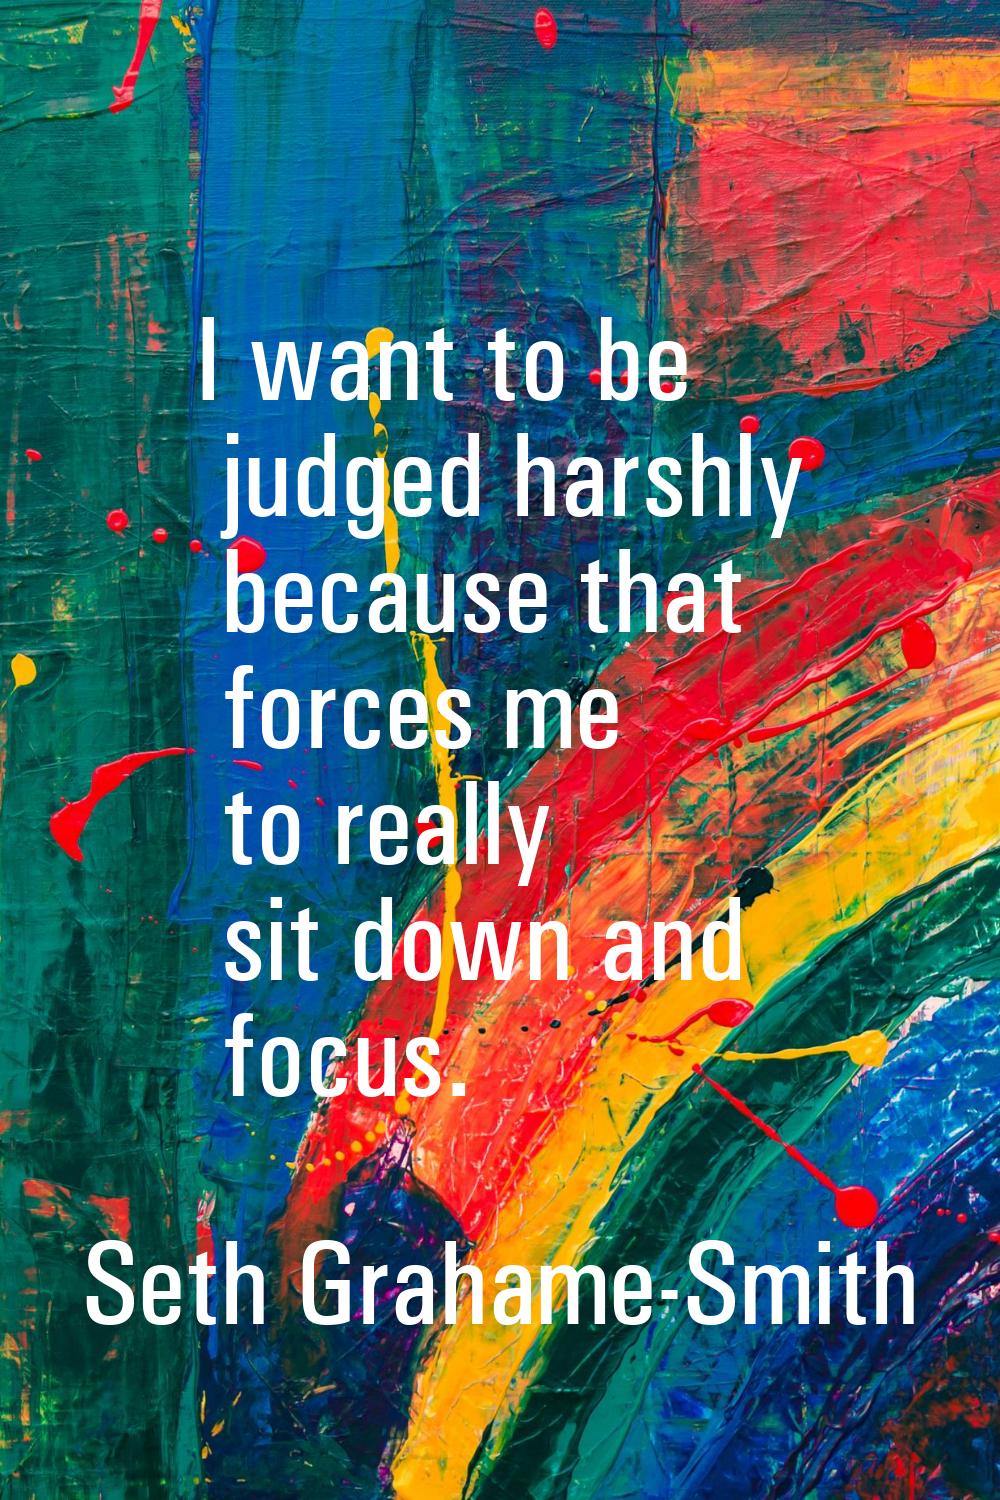 I want to be judged harshly because that forces me to really sit down and focus.